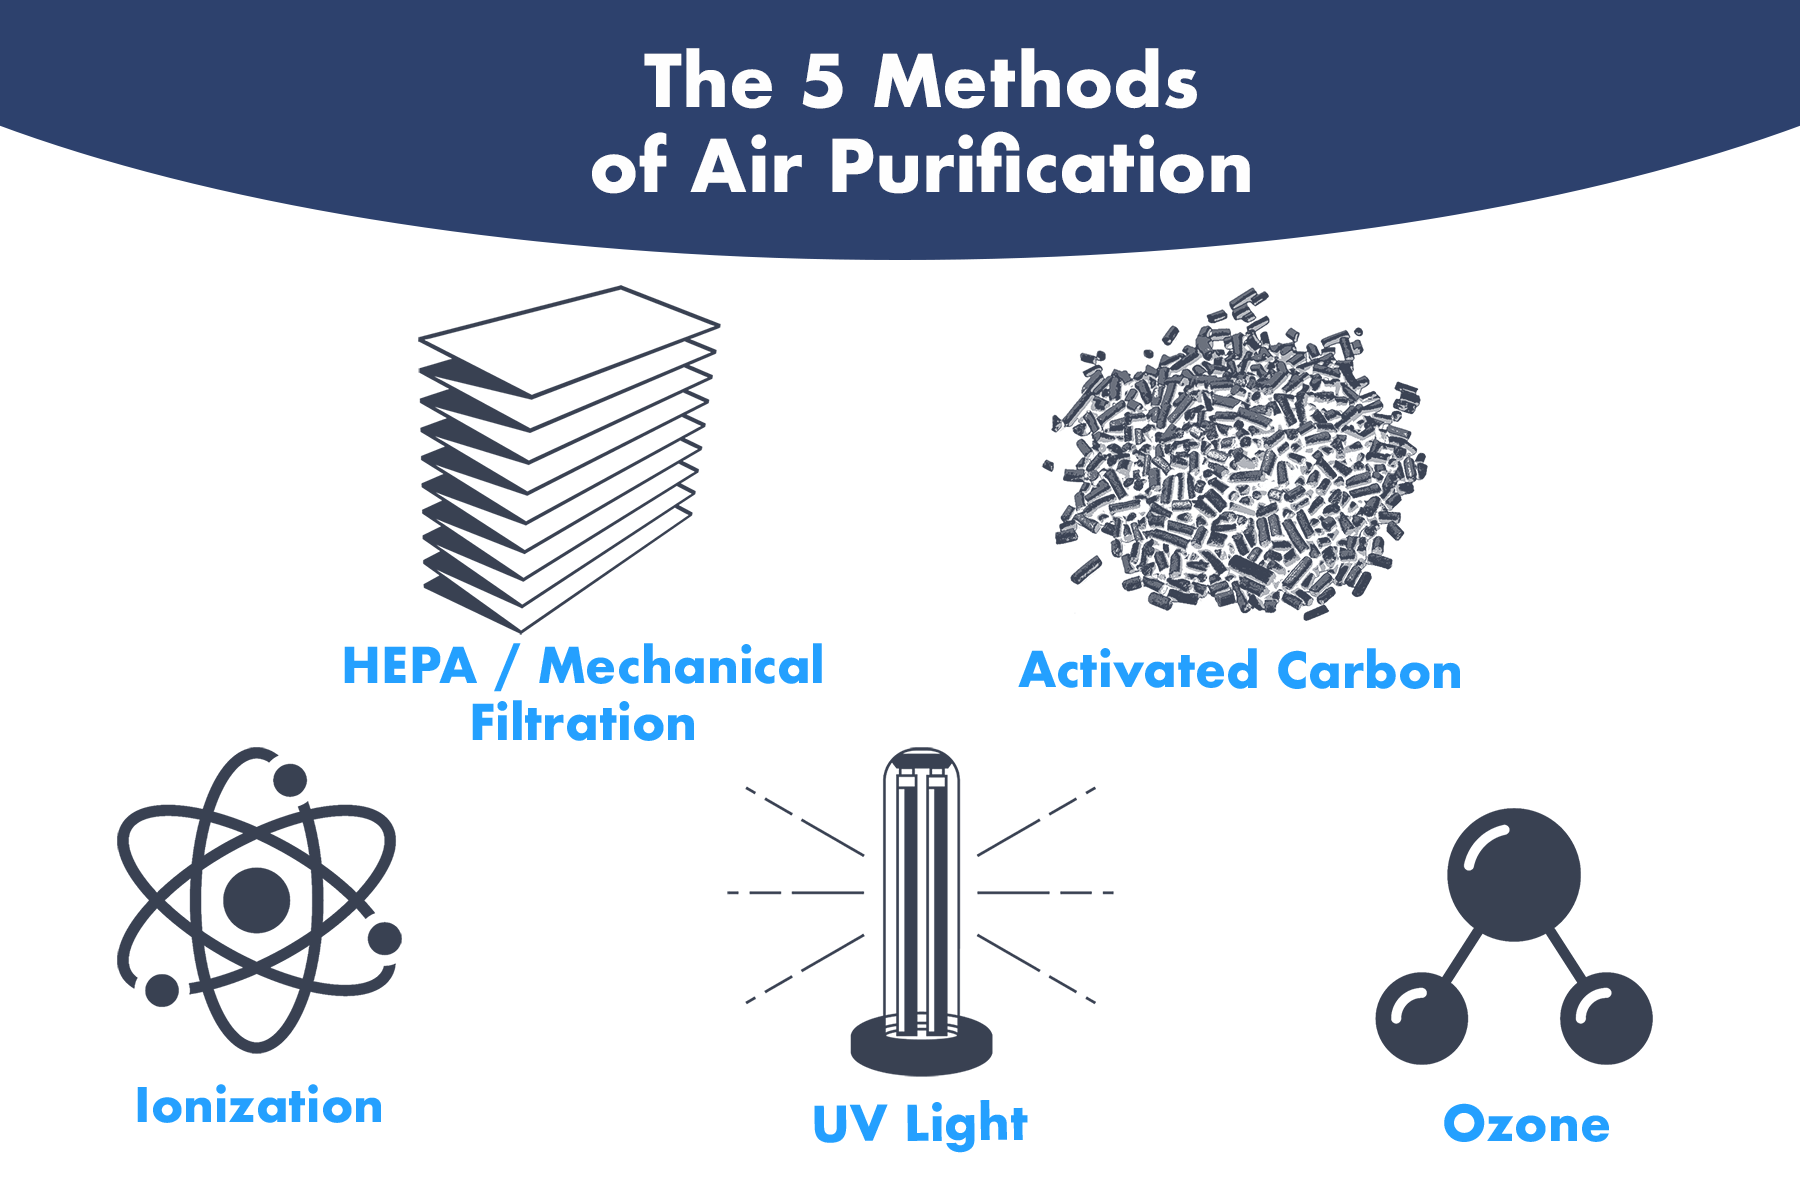 The 5 Methods of Air Purification